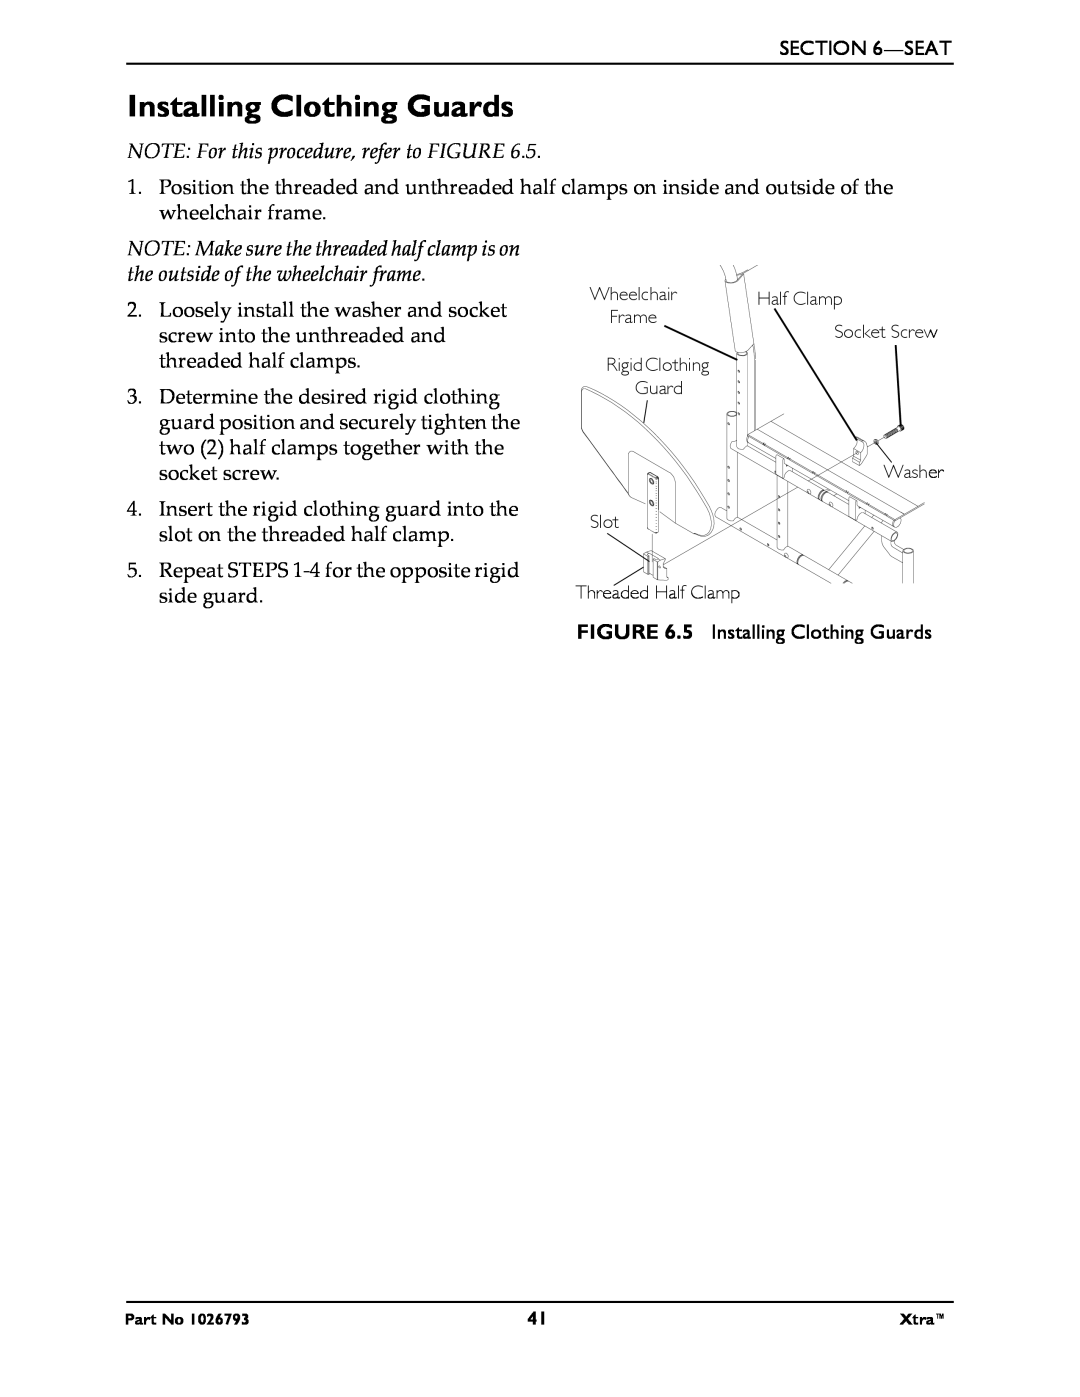 Invacare 1026793 manual Installing Clothing Guards, NOTE For this procedure, refer to FIGURE 